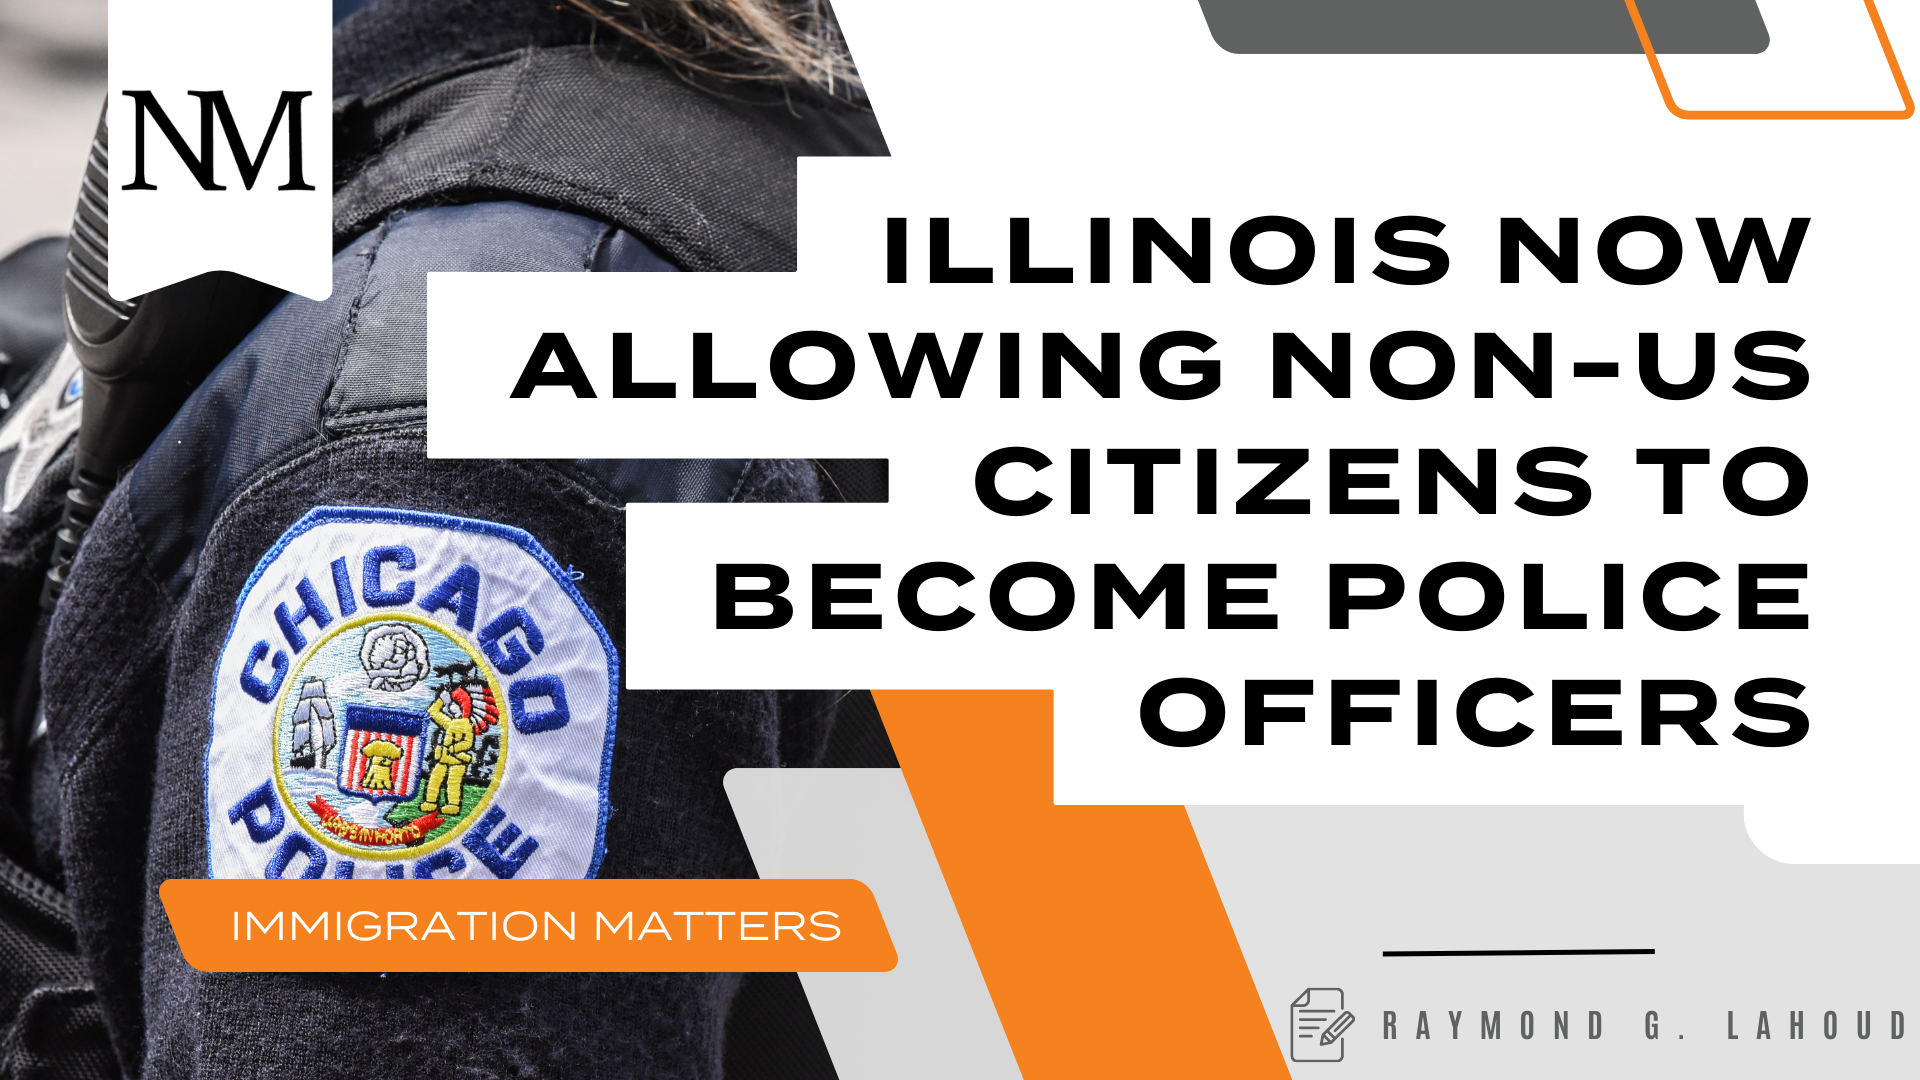 Illinois Now Allowing Non-US Citizens to Become Police Officers